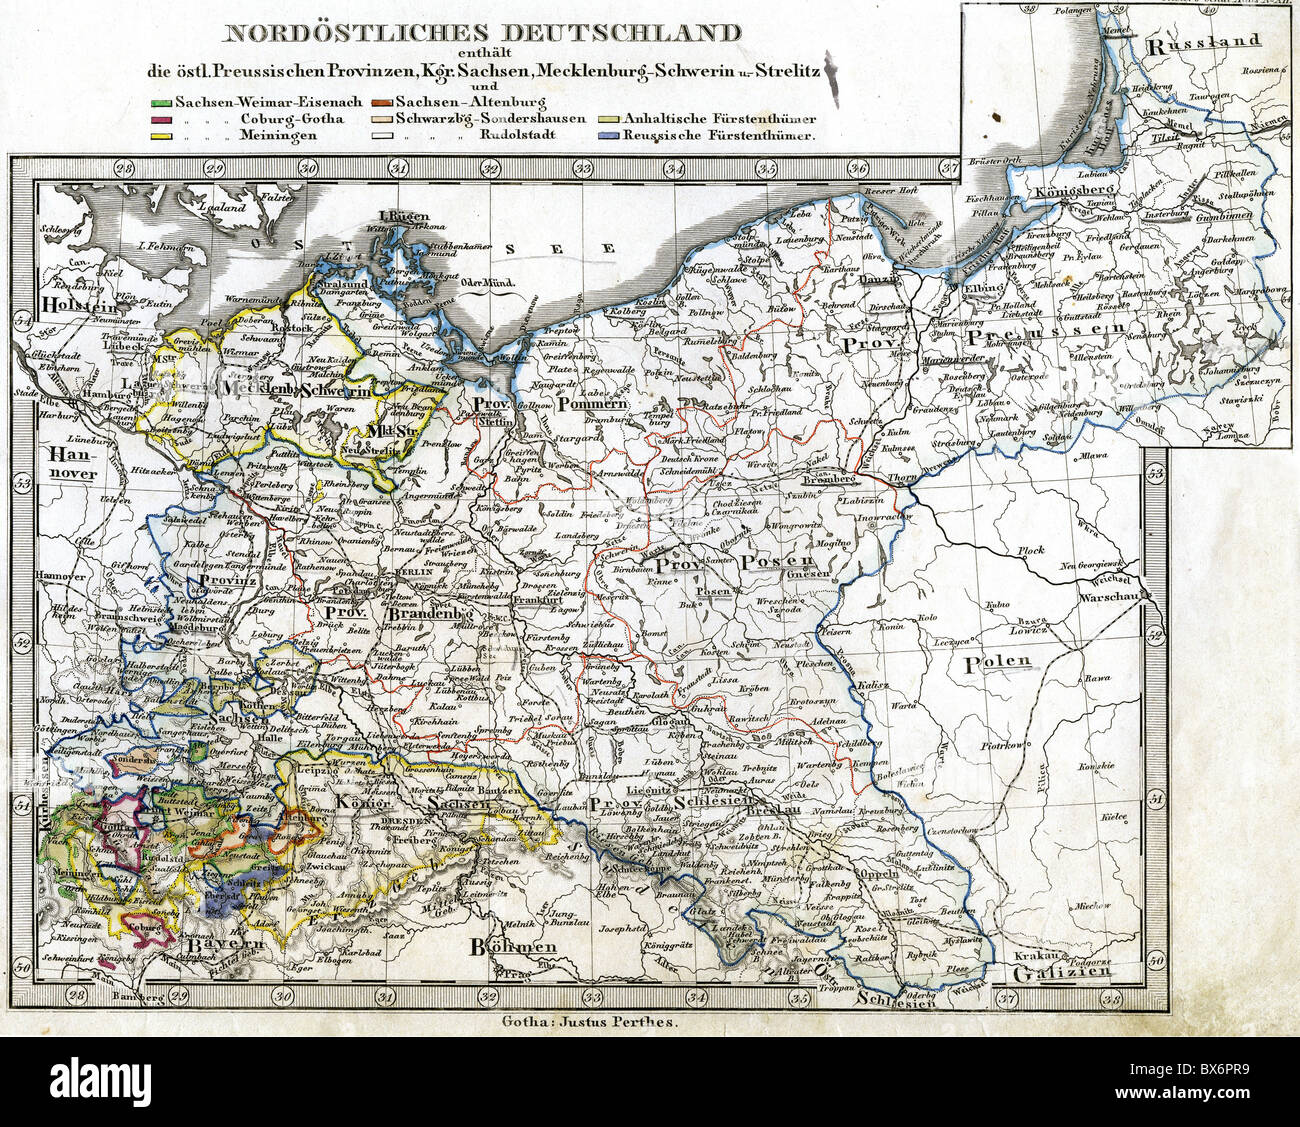 cartography, maps, Europa, Germany, Northeast, Prussia, Saxony, Mecklenburg, steel engraving, Stielers 'Handatlas', No XII, published by Justus Perthes, Gotha, 1851, , Additional-Rights-Clearences-Not Available Stock Photo